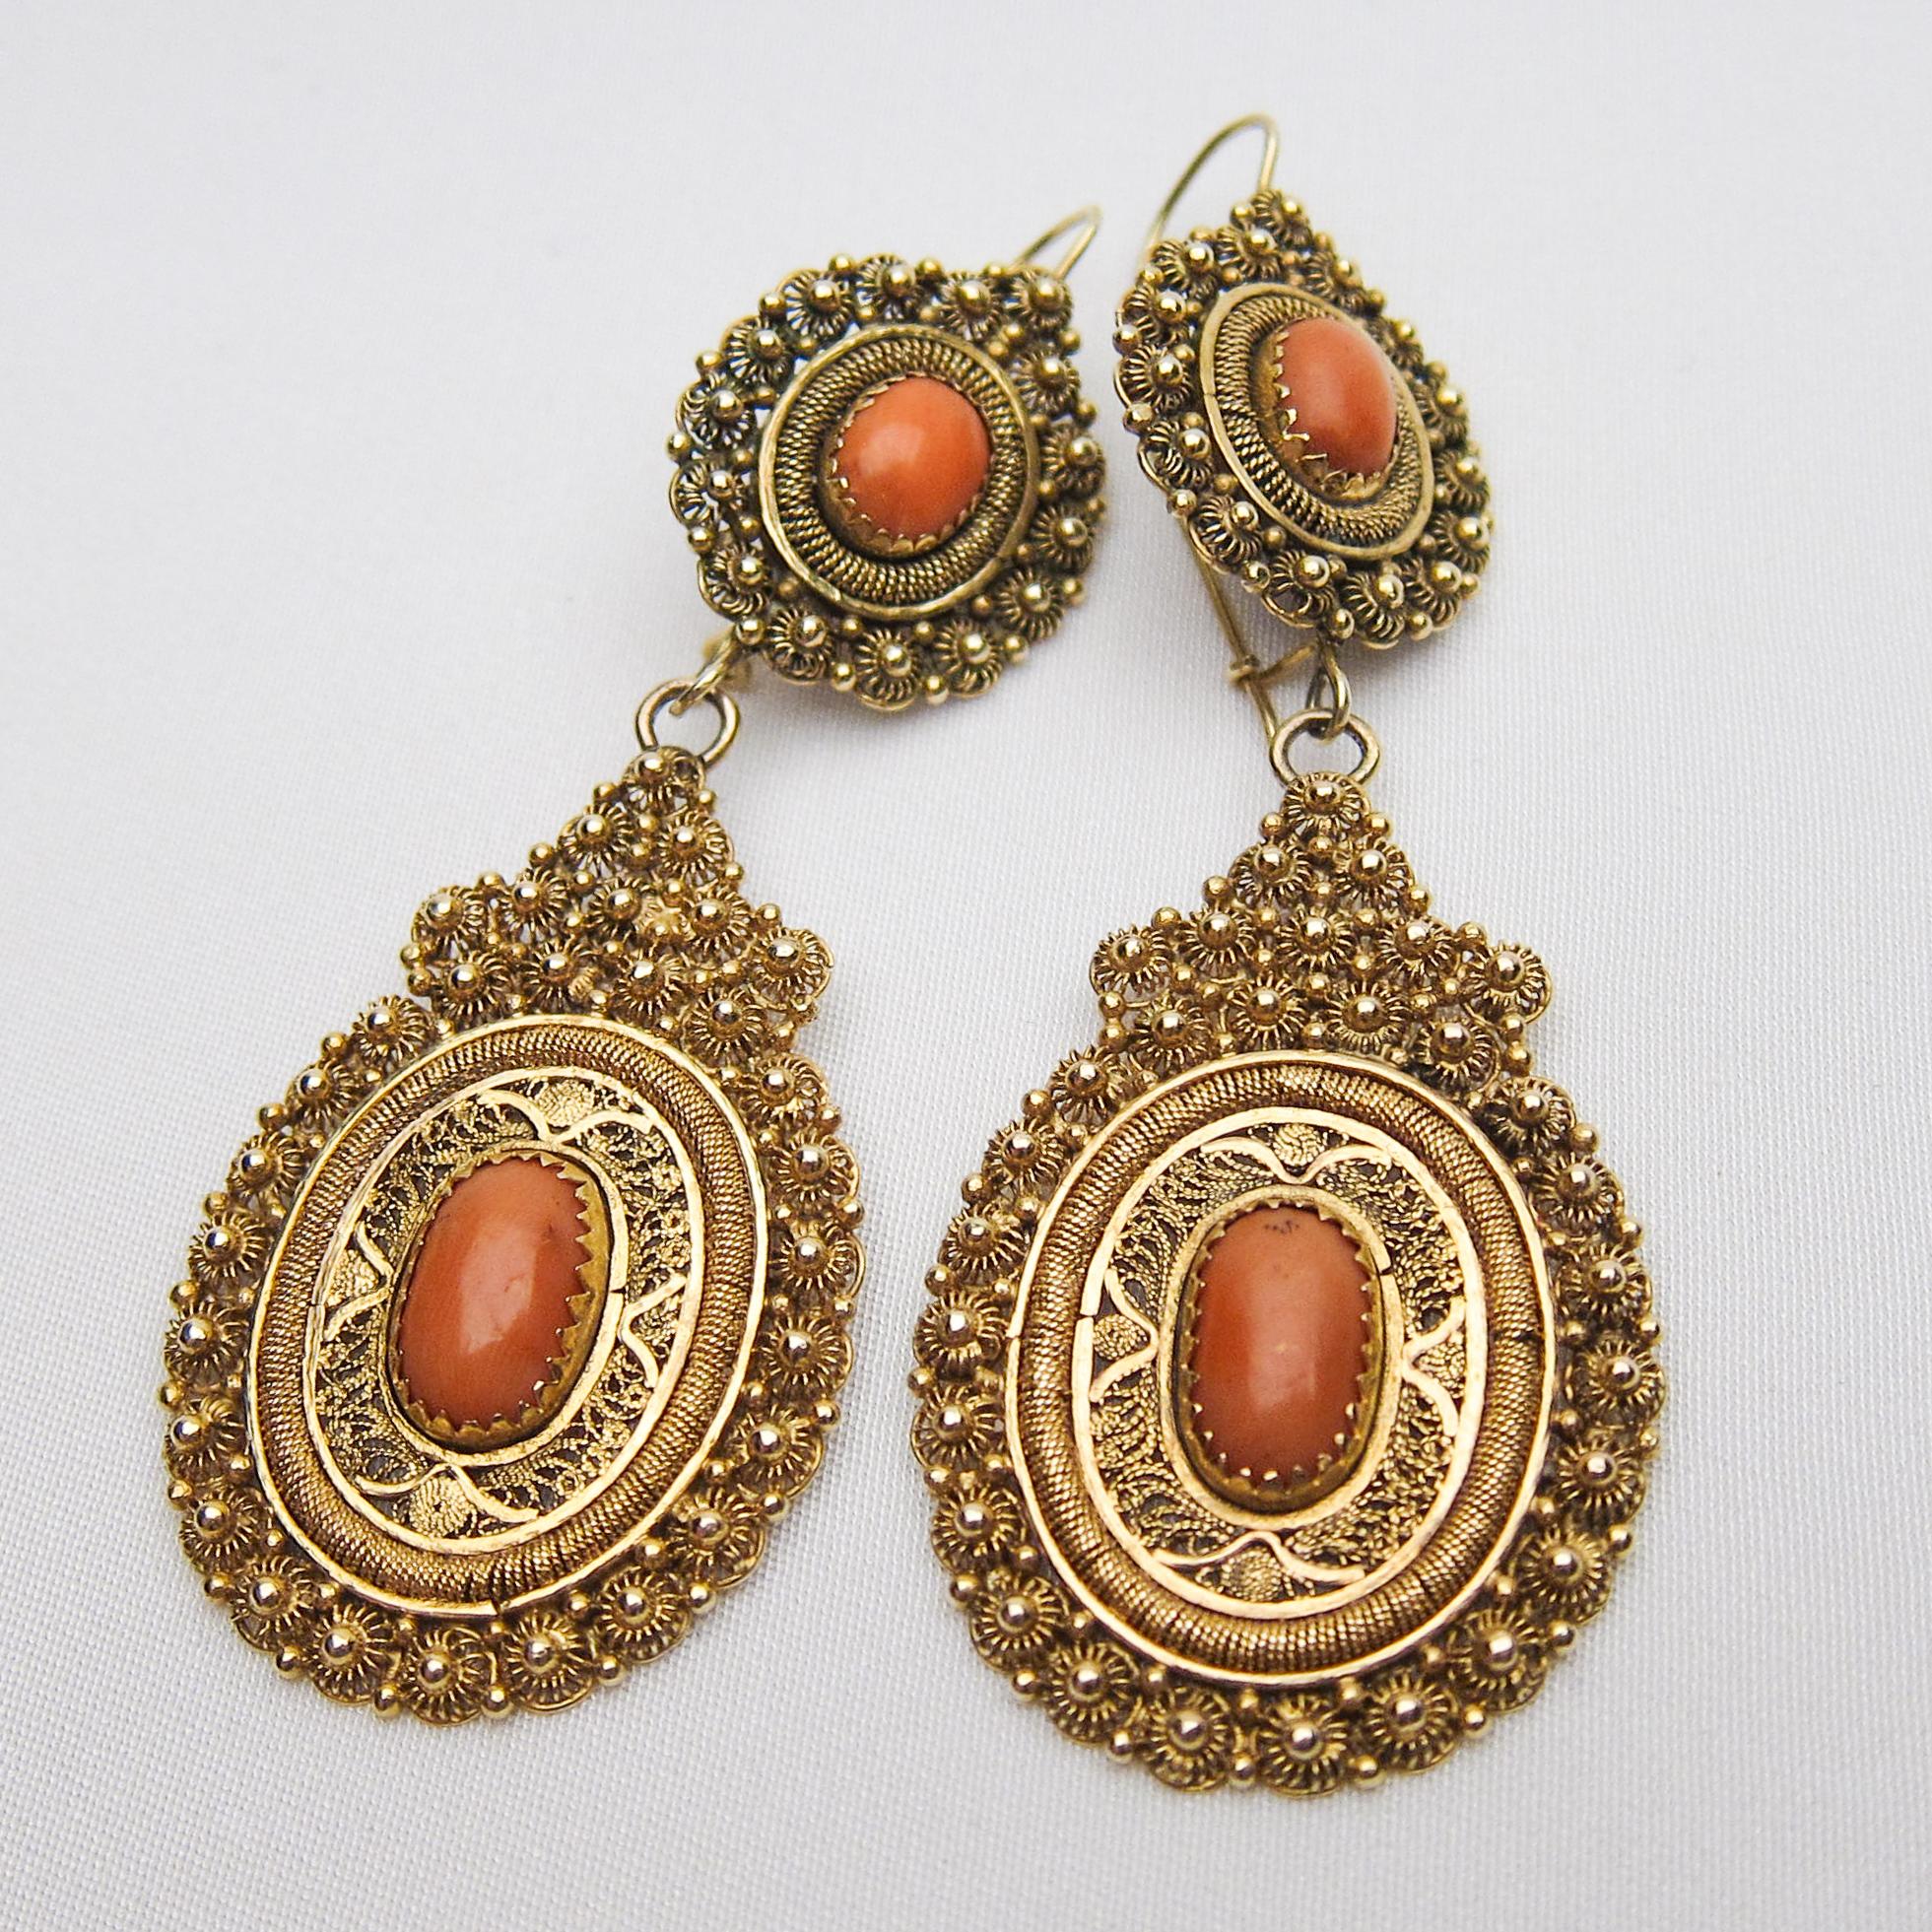  These amazing  handmade earrings feature orange coral cabochons set in fabulously ornamental 14KT gold settings. These stunning pieces articulate the beauty and grace of Victorian craftsmanship.